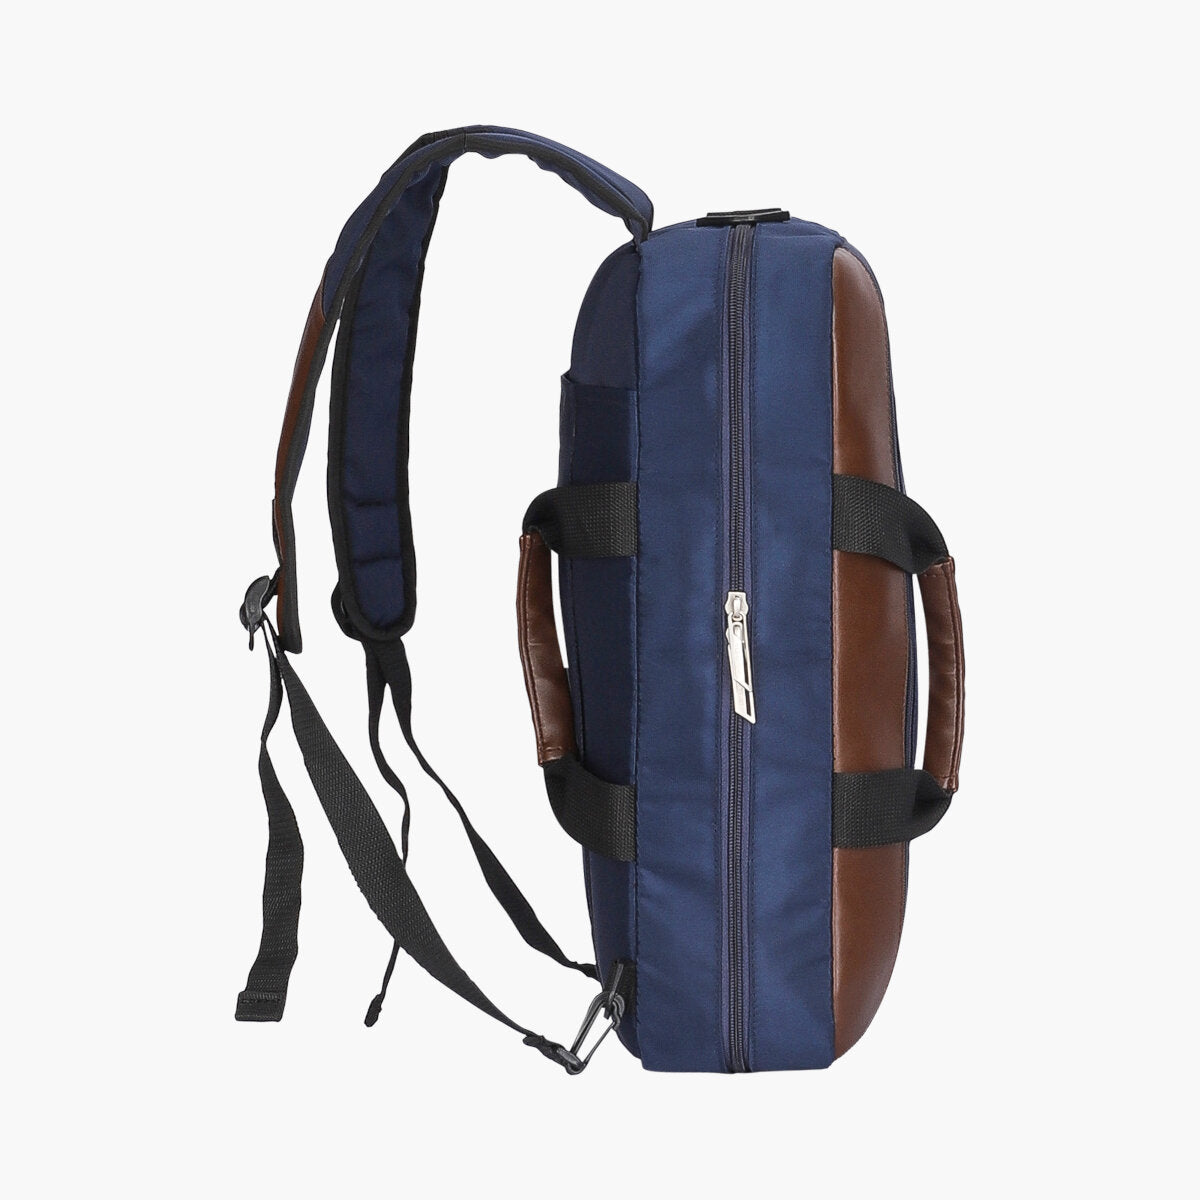 Navy | Protecta The Underdog Convertible Briefcase Backpack - 5